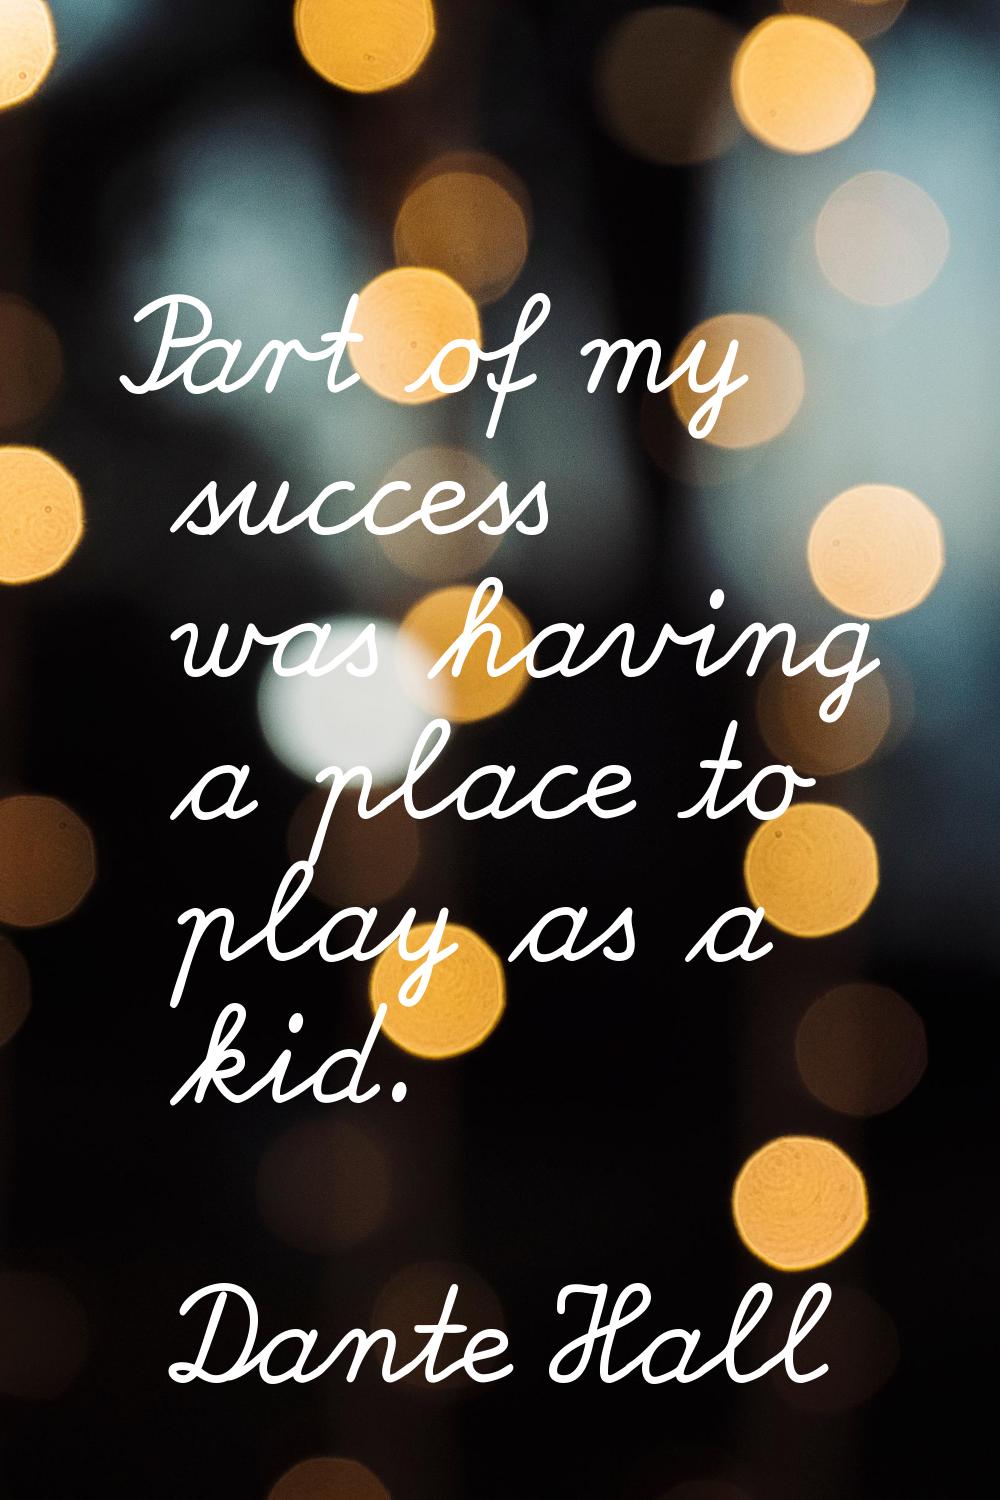 Part of my success was having a place to play as a kid.